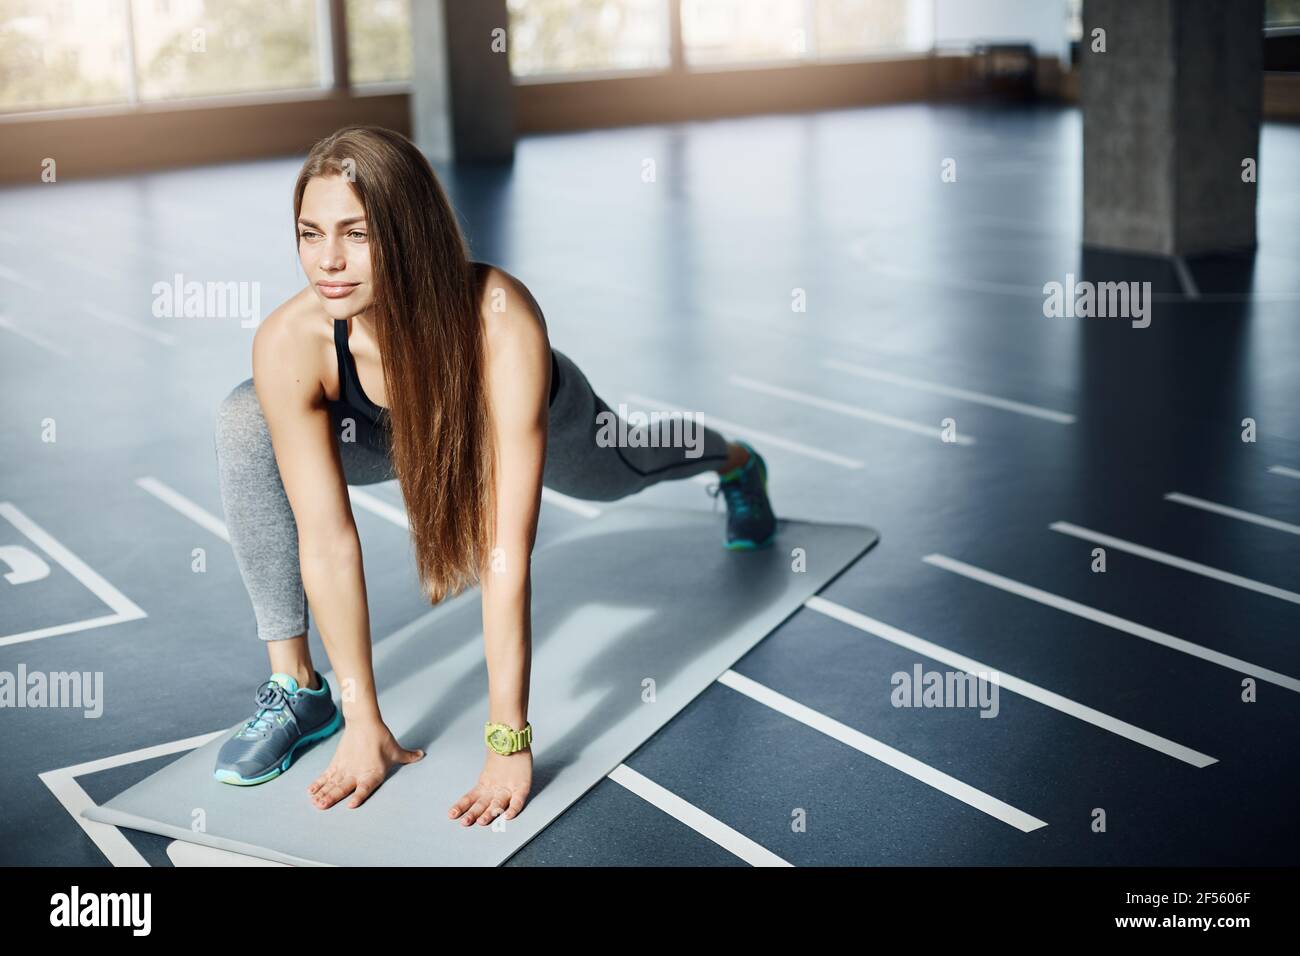 Concentrated female athlete stretching on a yoga mat early in the morning  in empty gym. Beautiful woman in her mid 30s taking care of her fit body  Stock Photo - Alamy